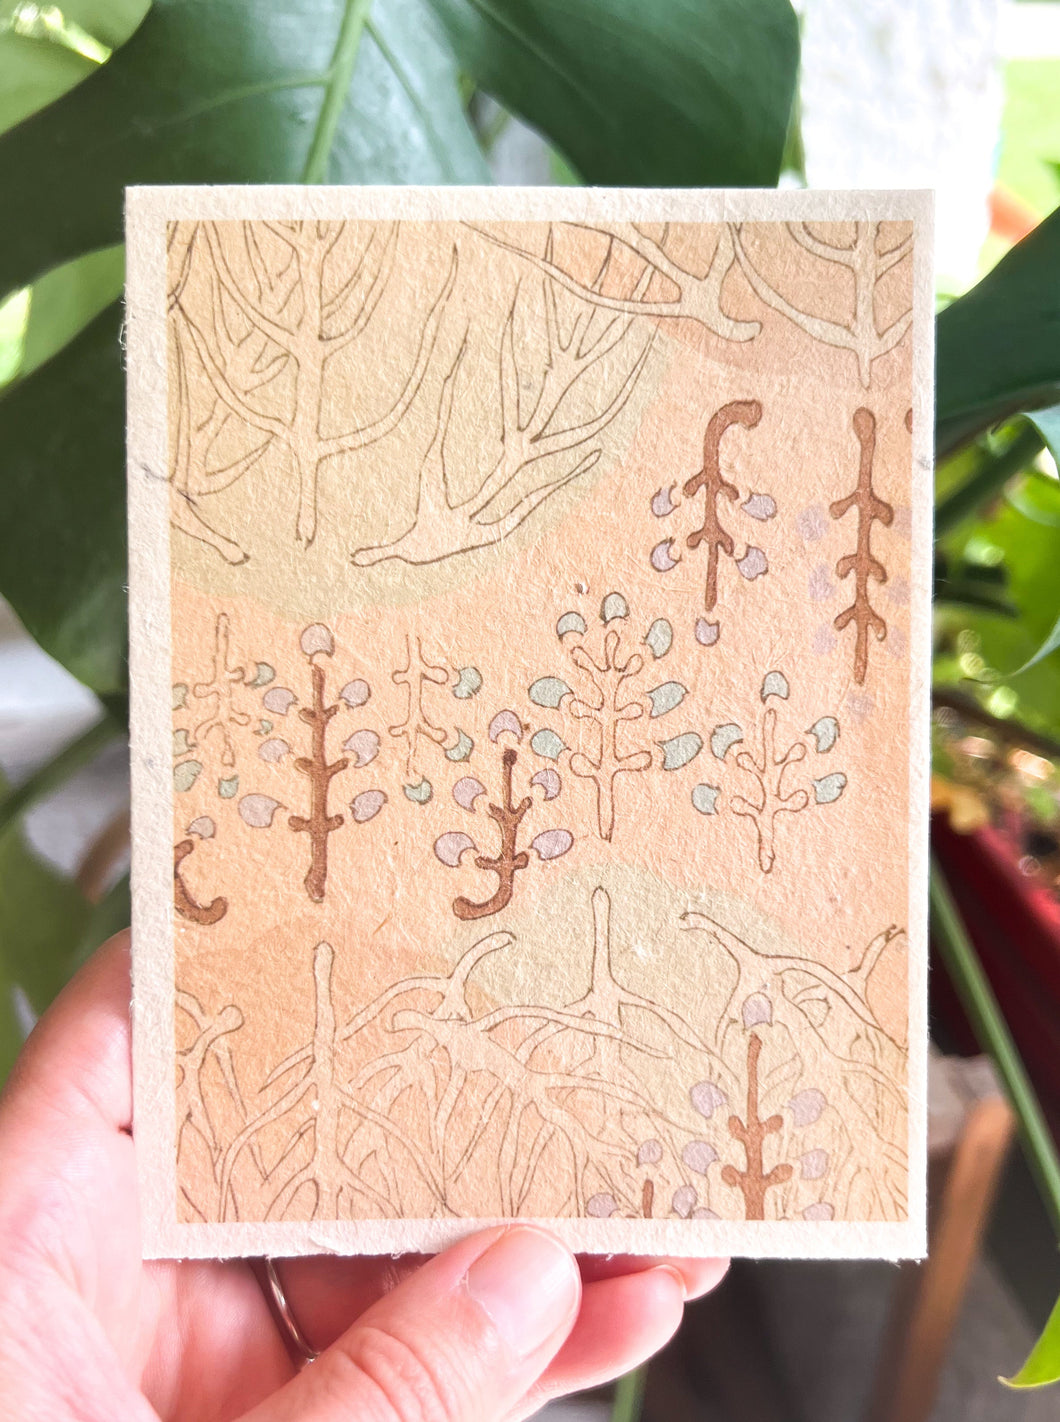 Japanese Plantable Seed Card || Zero Waste || Supports Women || Eco-friendly || J30